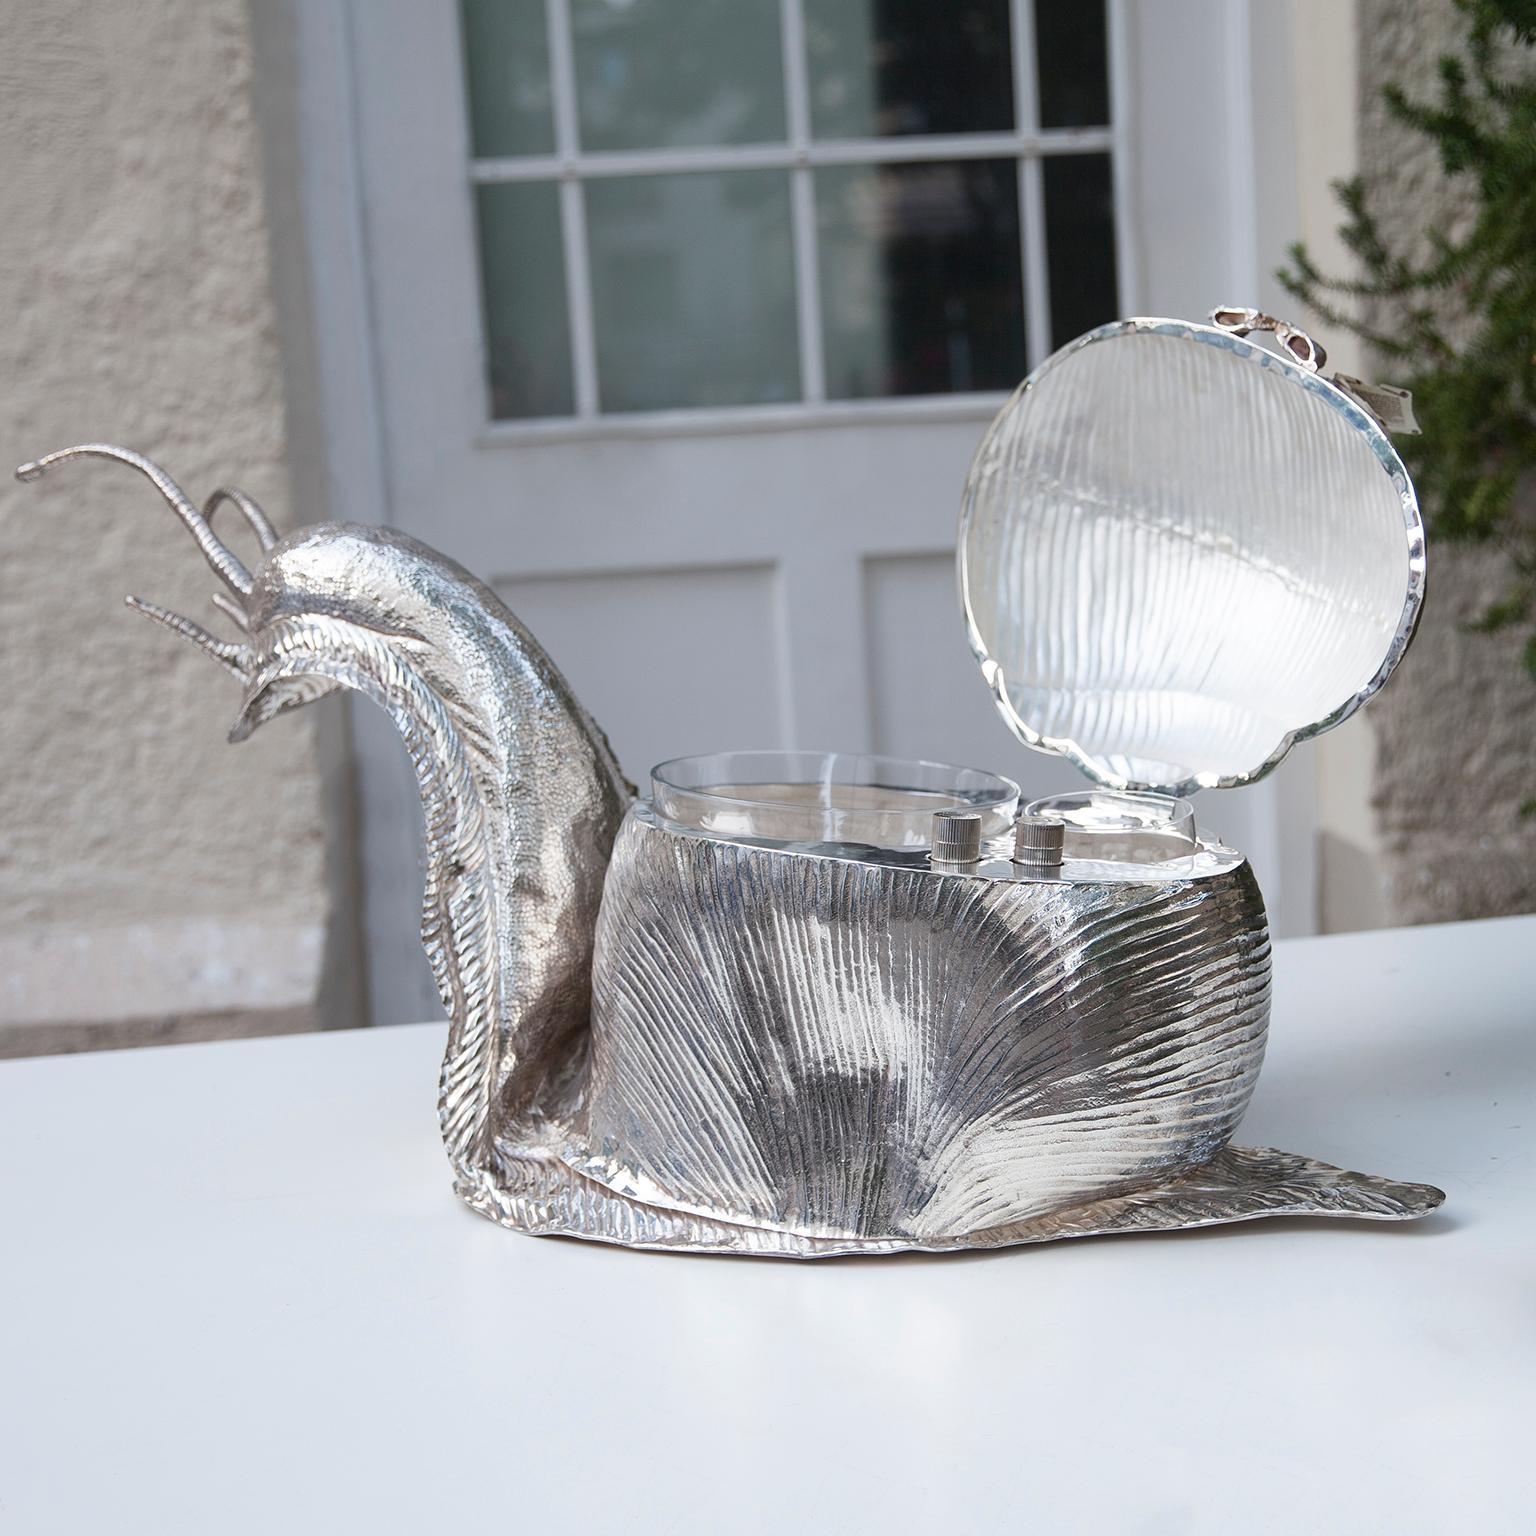 Hollywood Regency Franco Lapini Silver Plated Giant Snail Soup Bowl Centerpiece, Italy, 1980